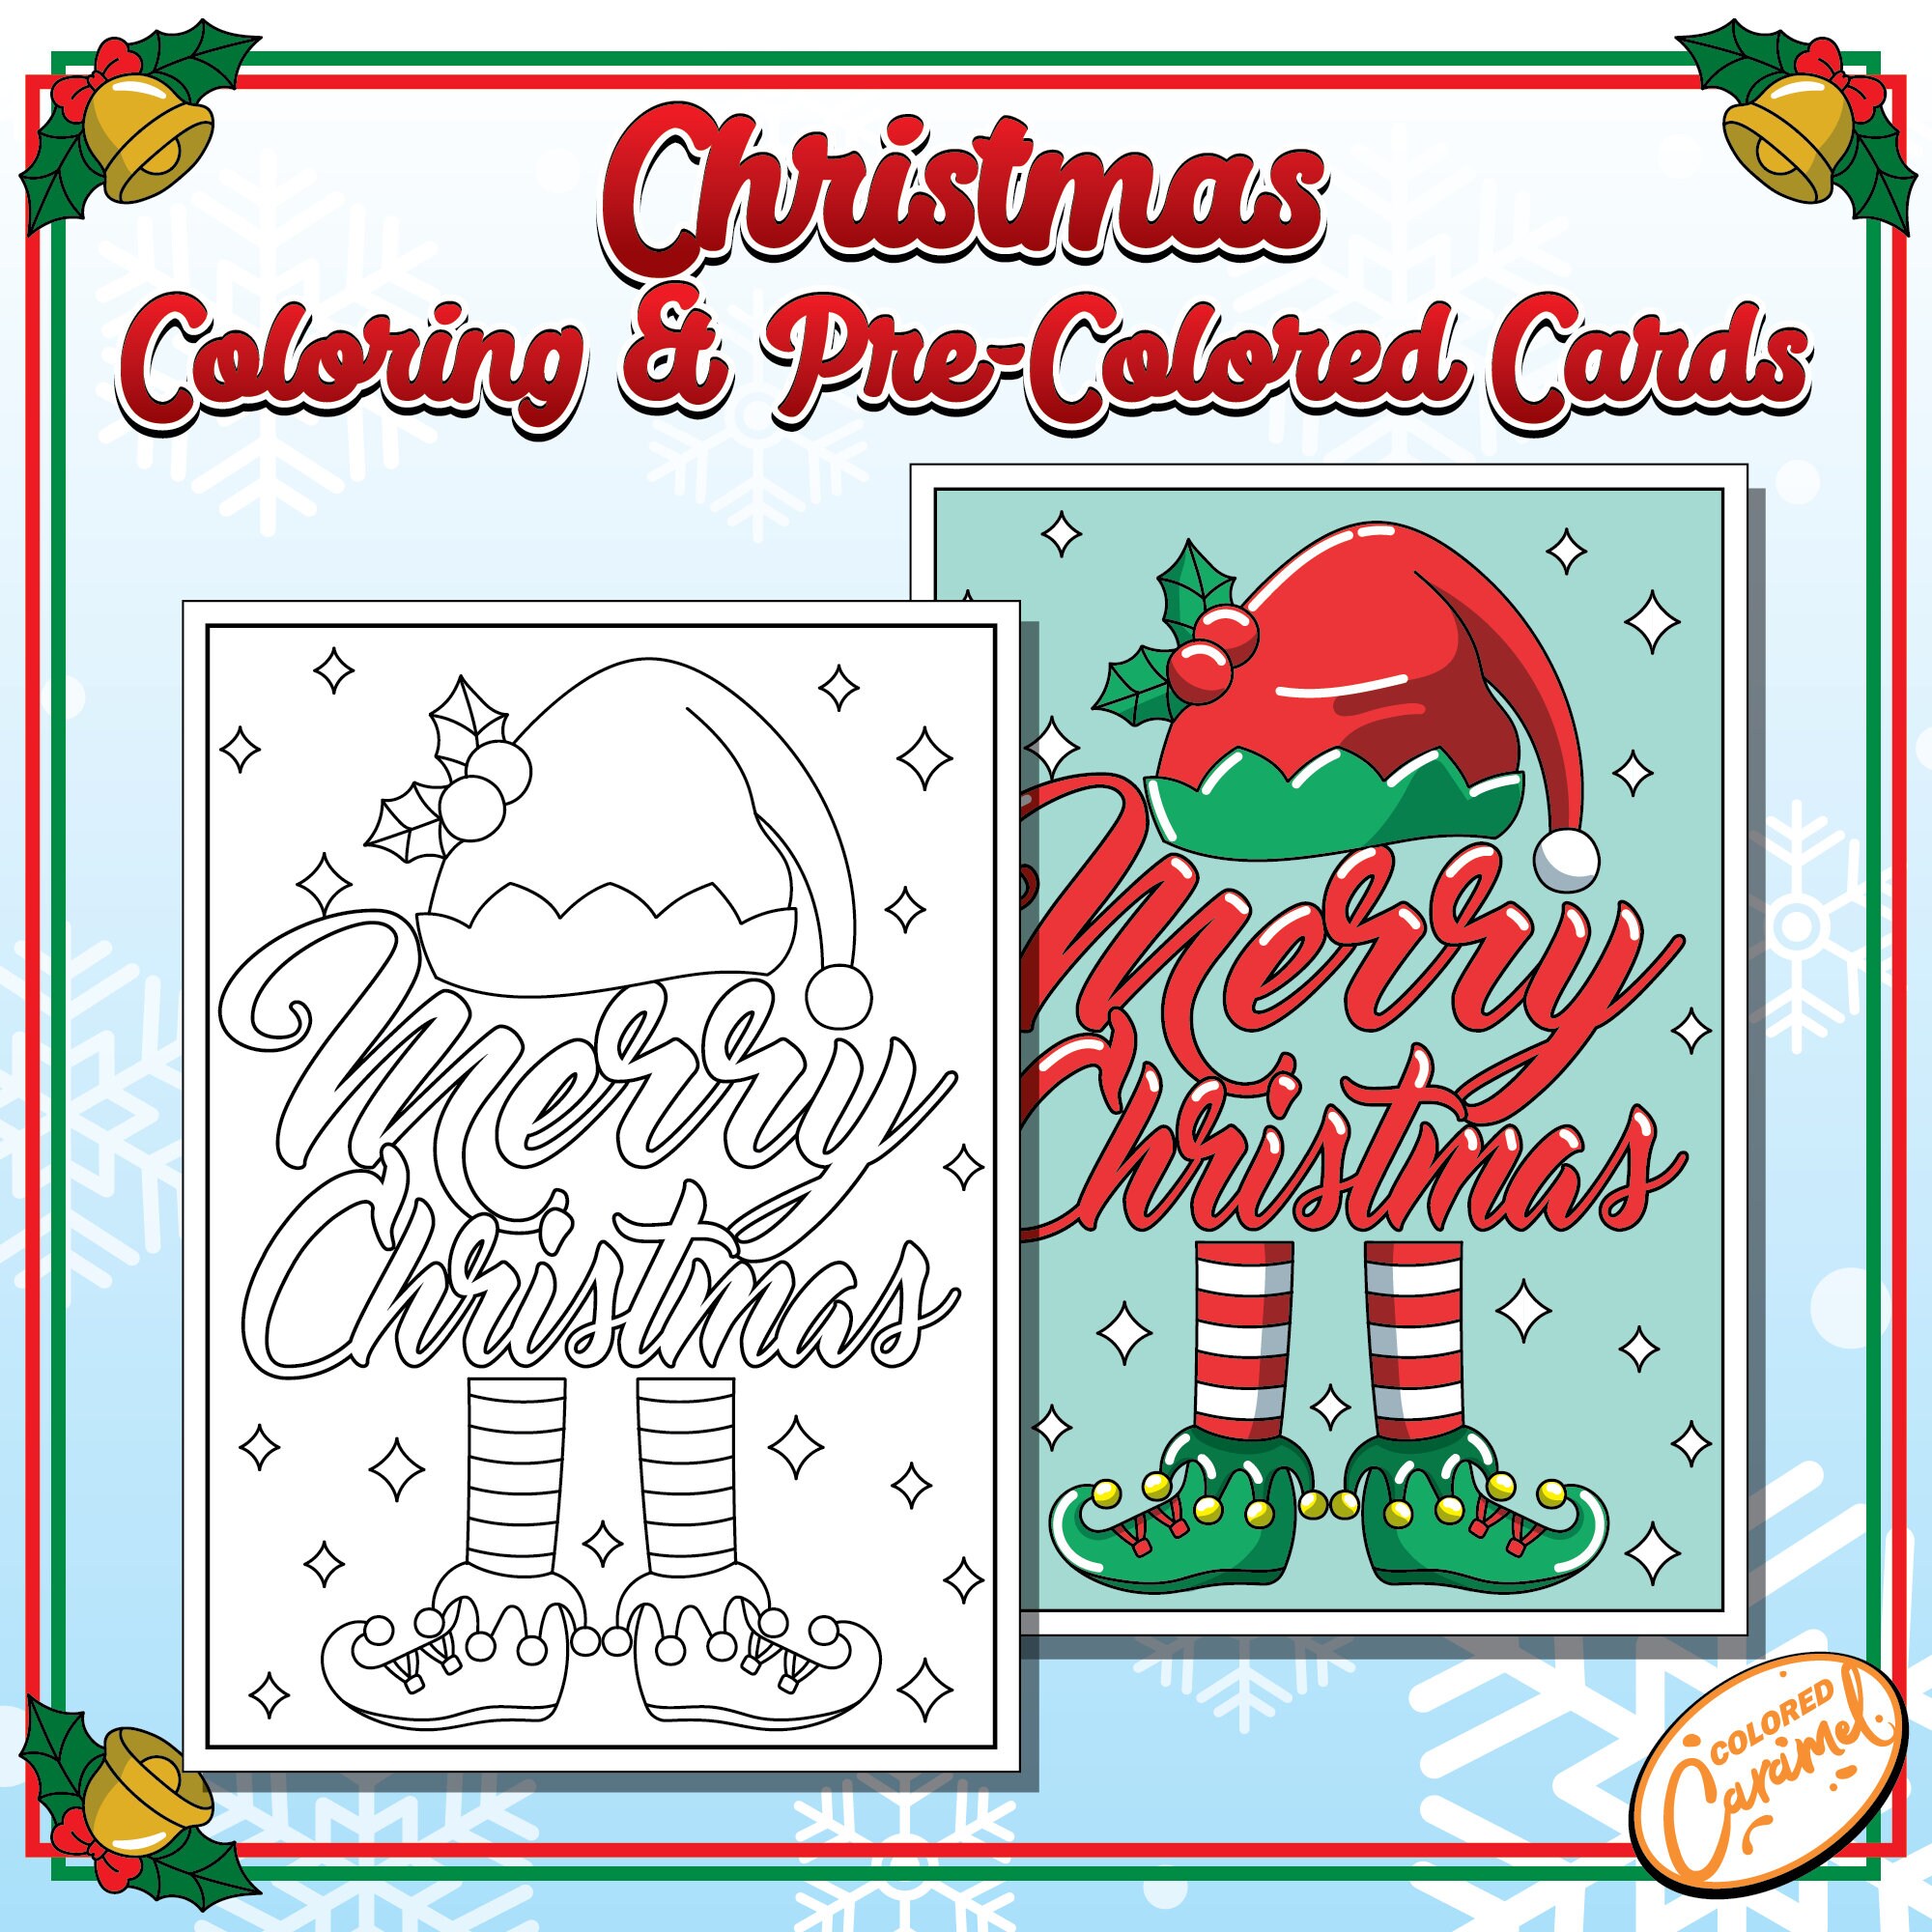 Merry Christmas Coloring Card, Colorable and Pre-colored Holiday Greeting Card, DIY Festive and Joyful Printable Instant Digital Download